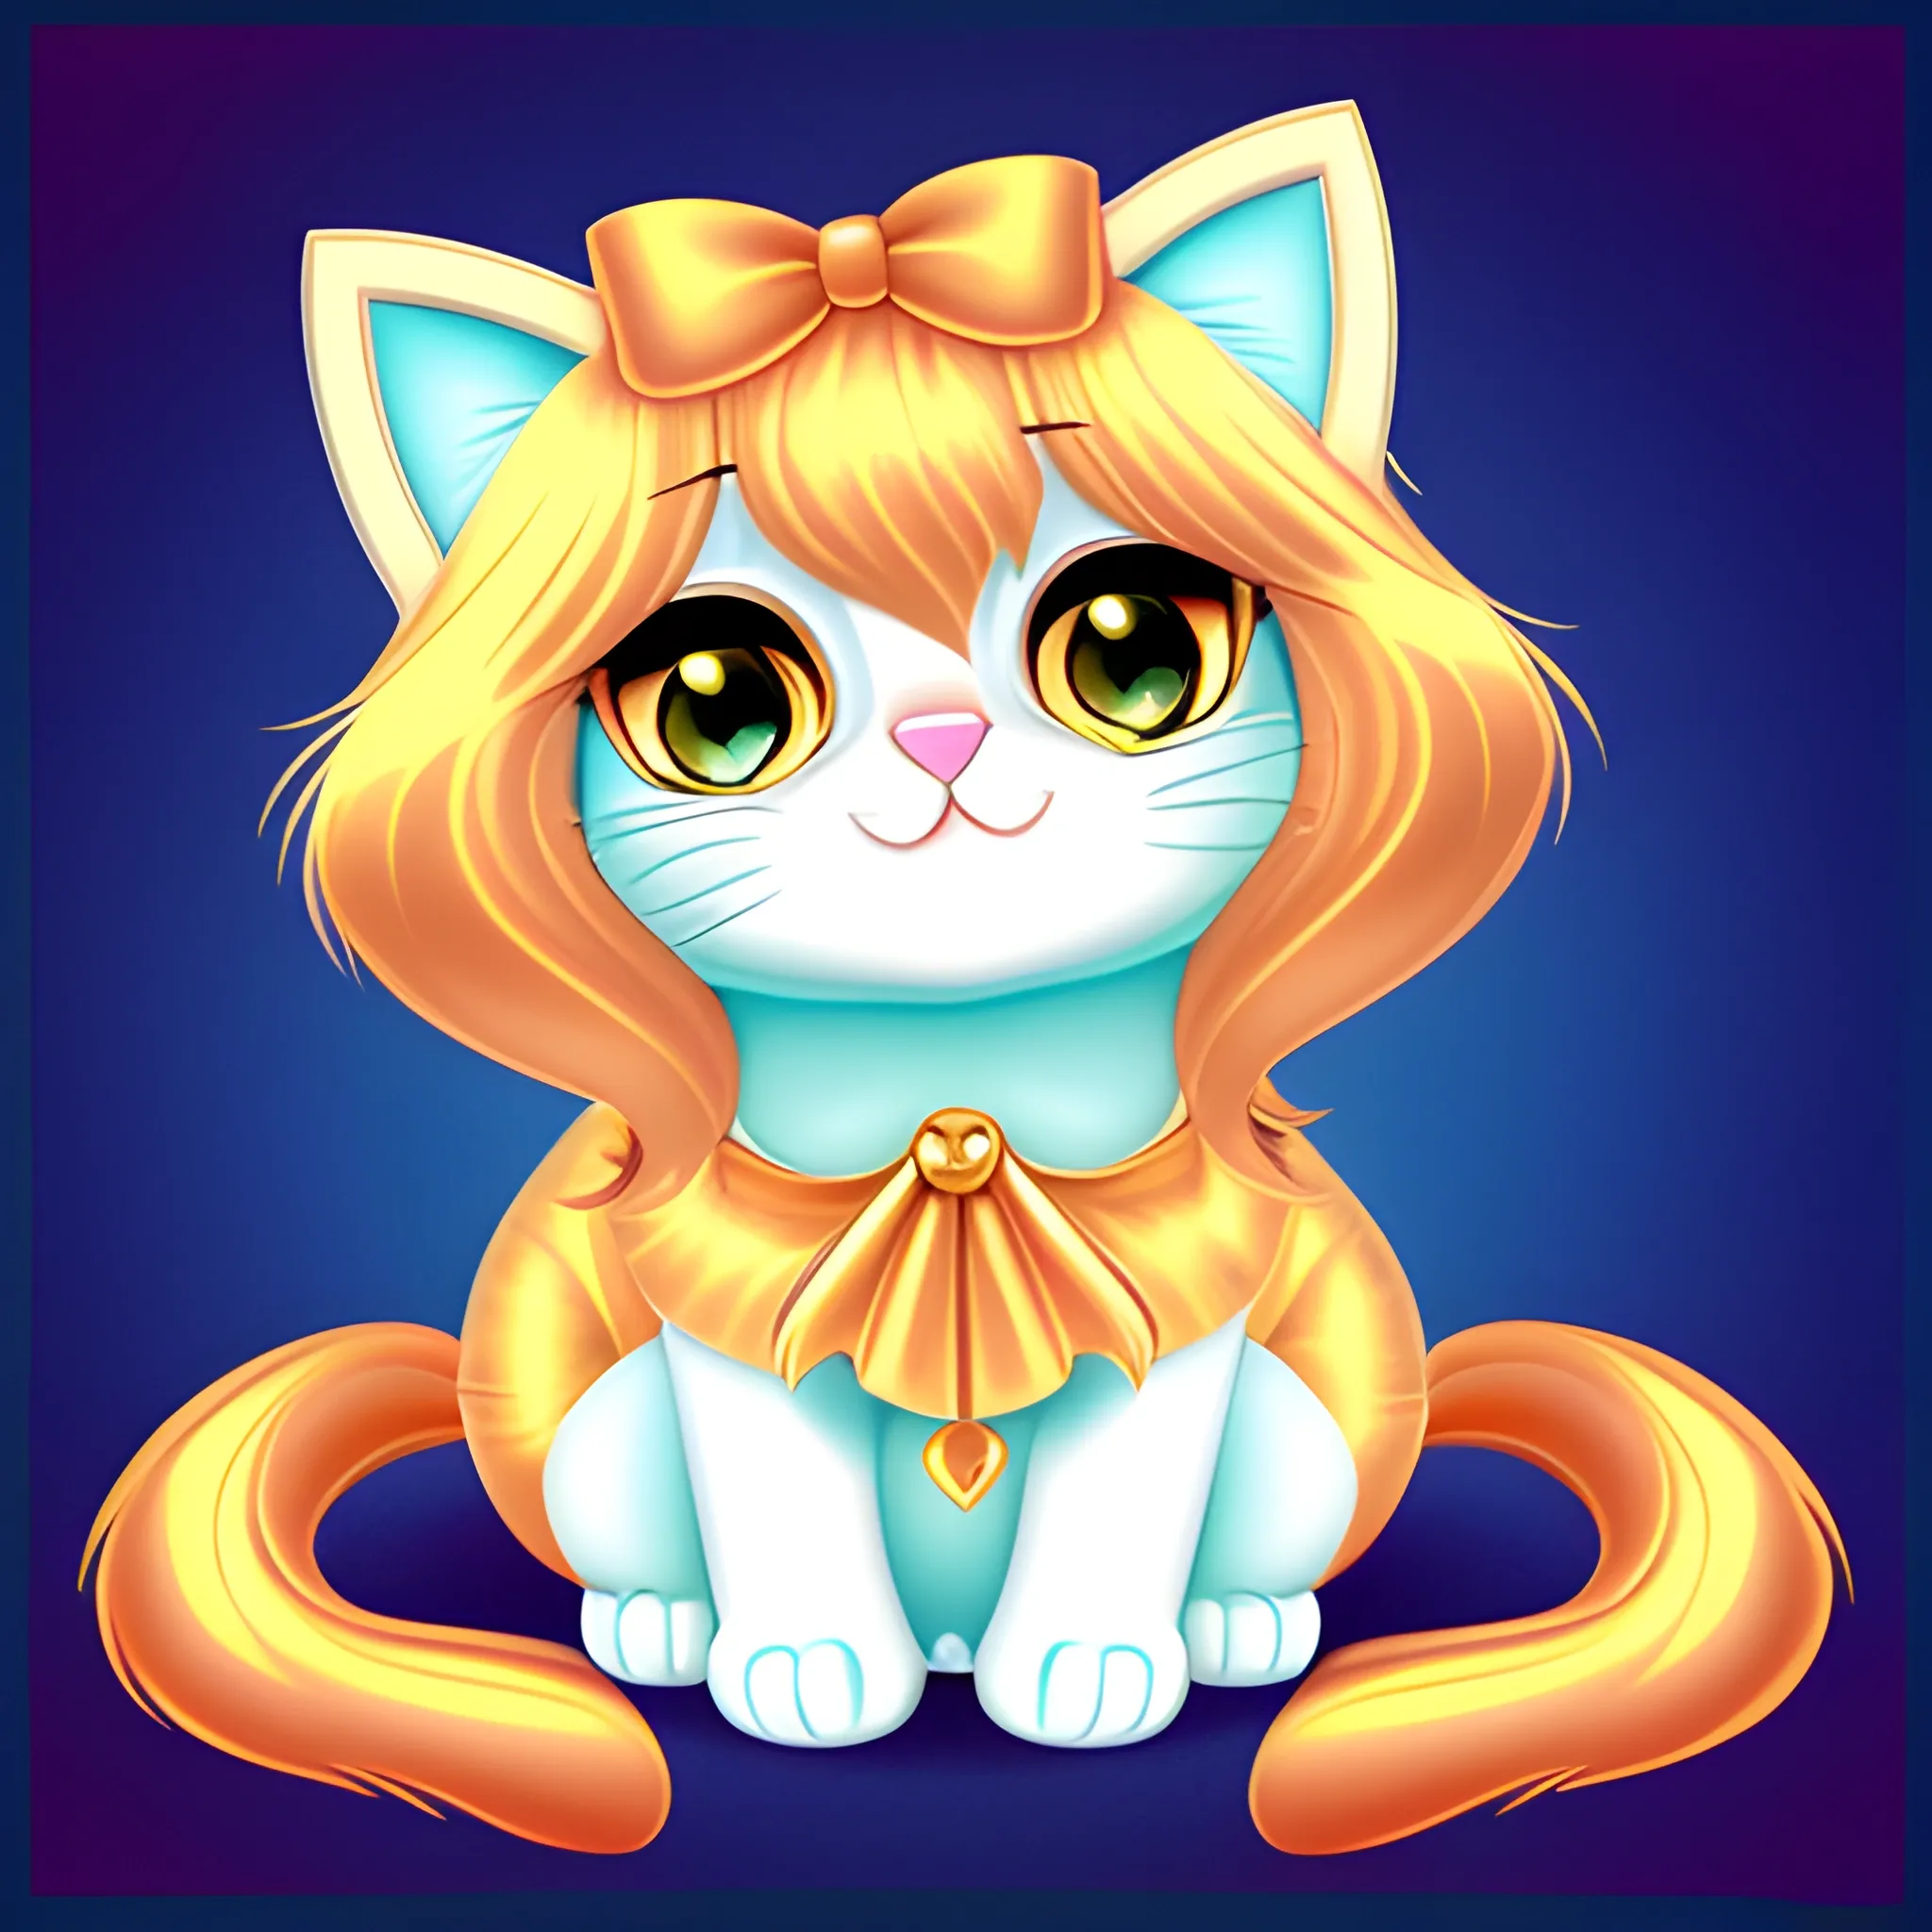  Tiffany cat  With her fur shimmering like gold, Cartoon